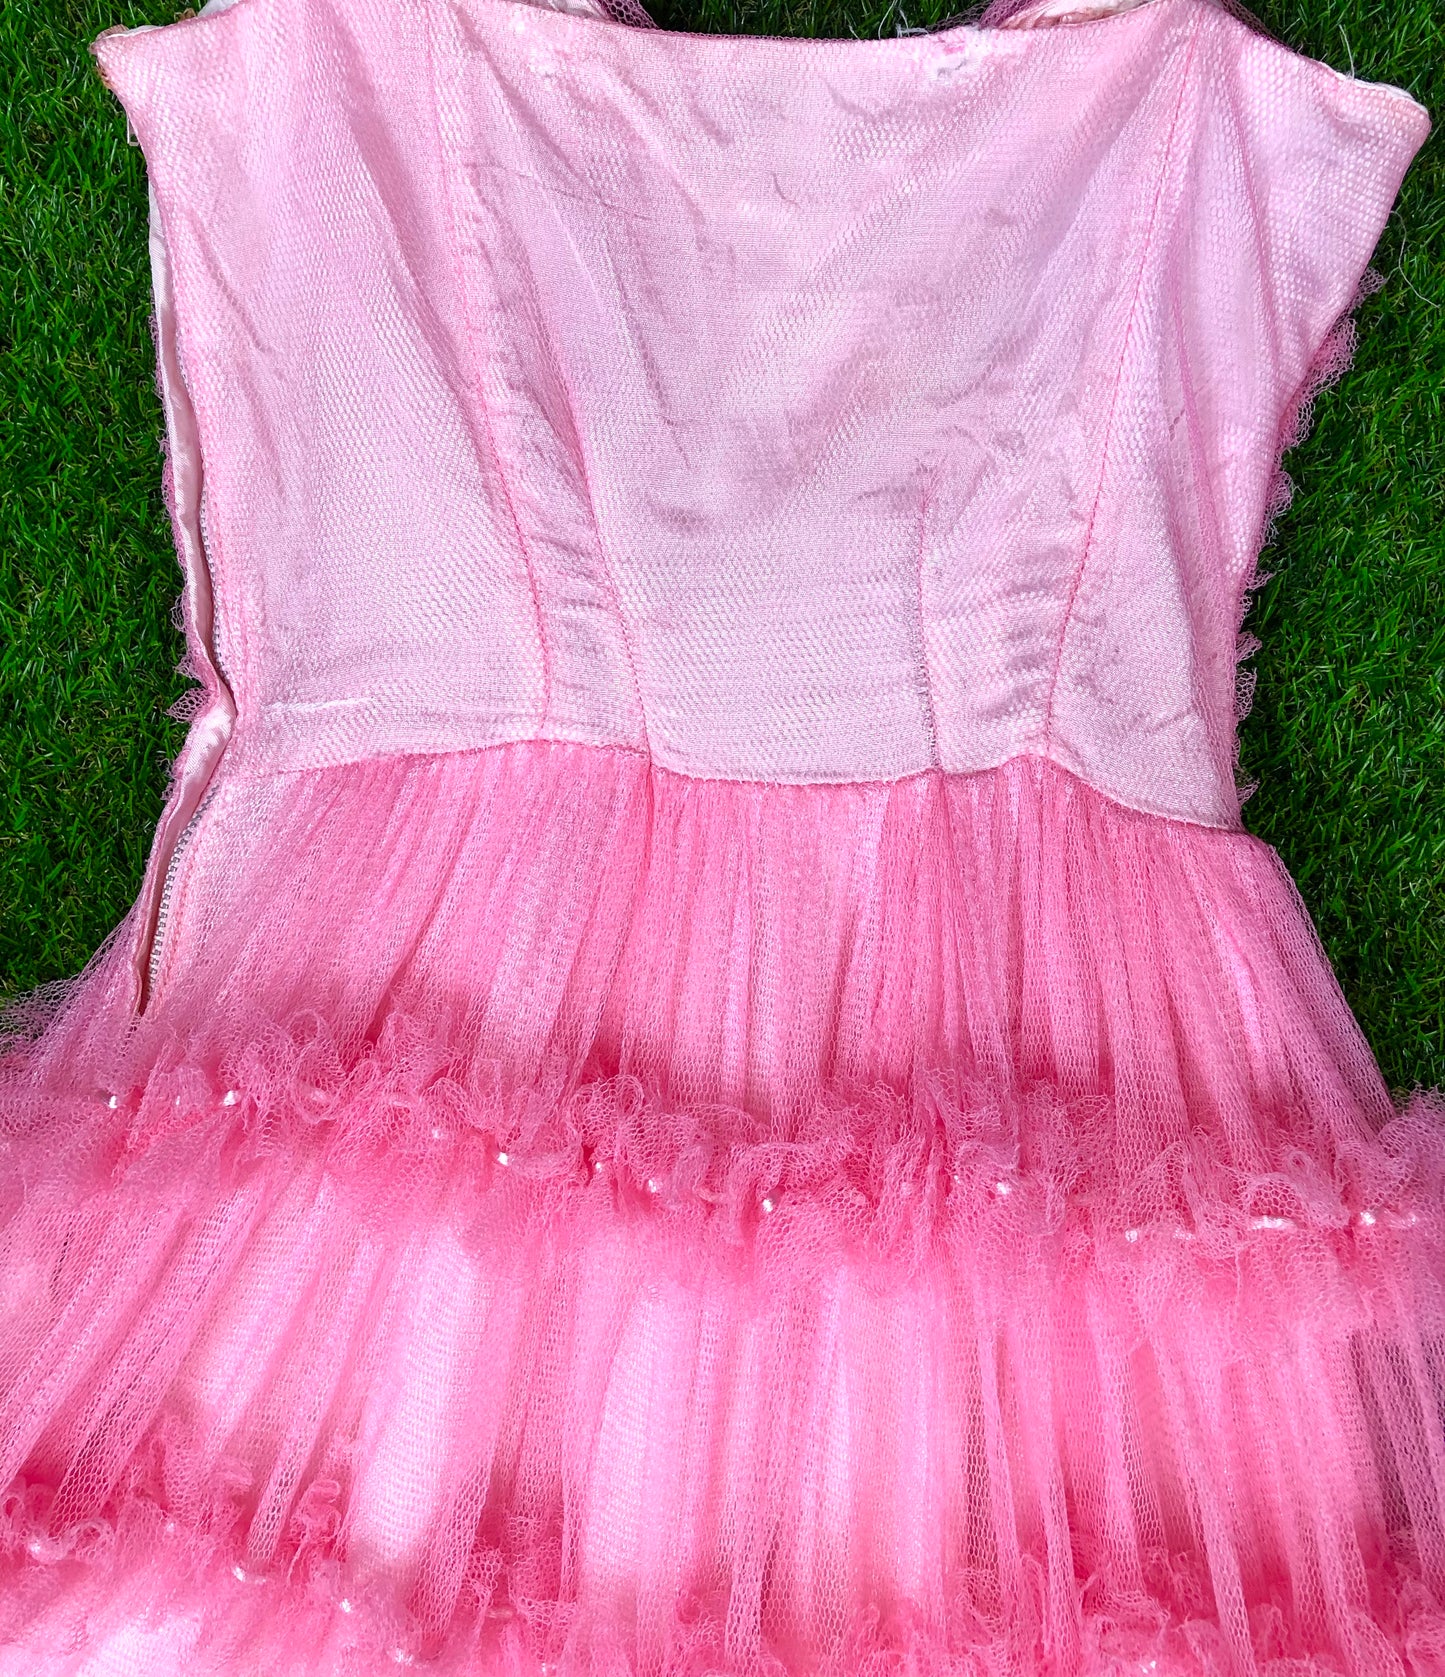 1950's Barbie Pink Tulle Party Dress With Sweetheart Neckline